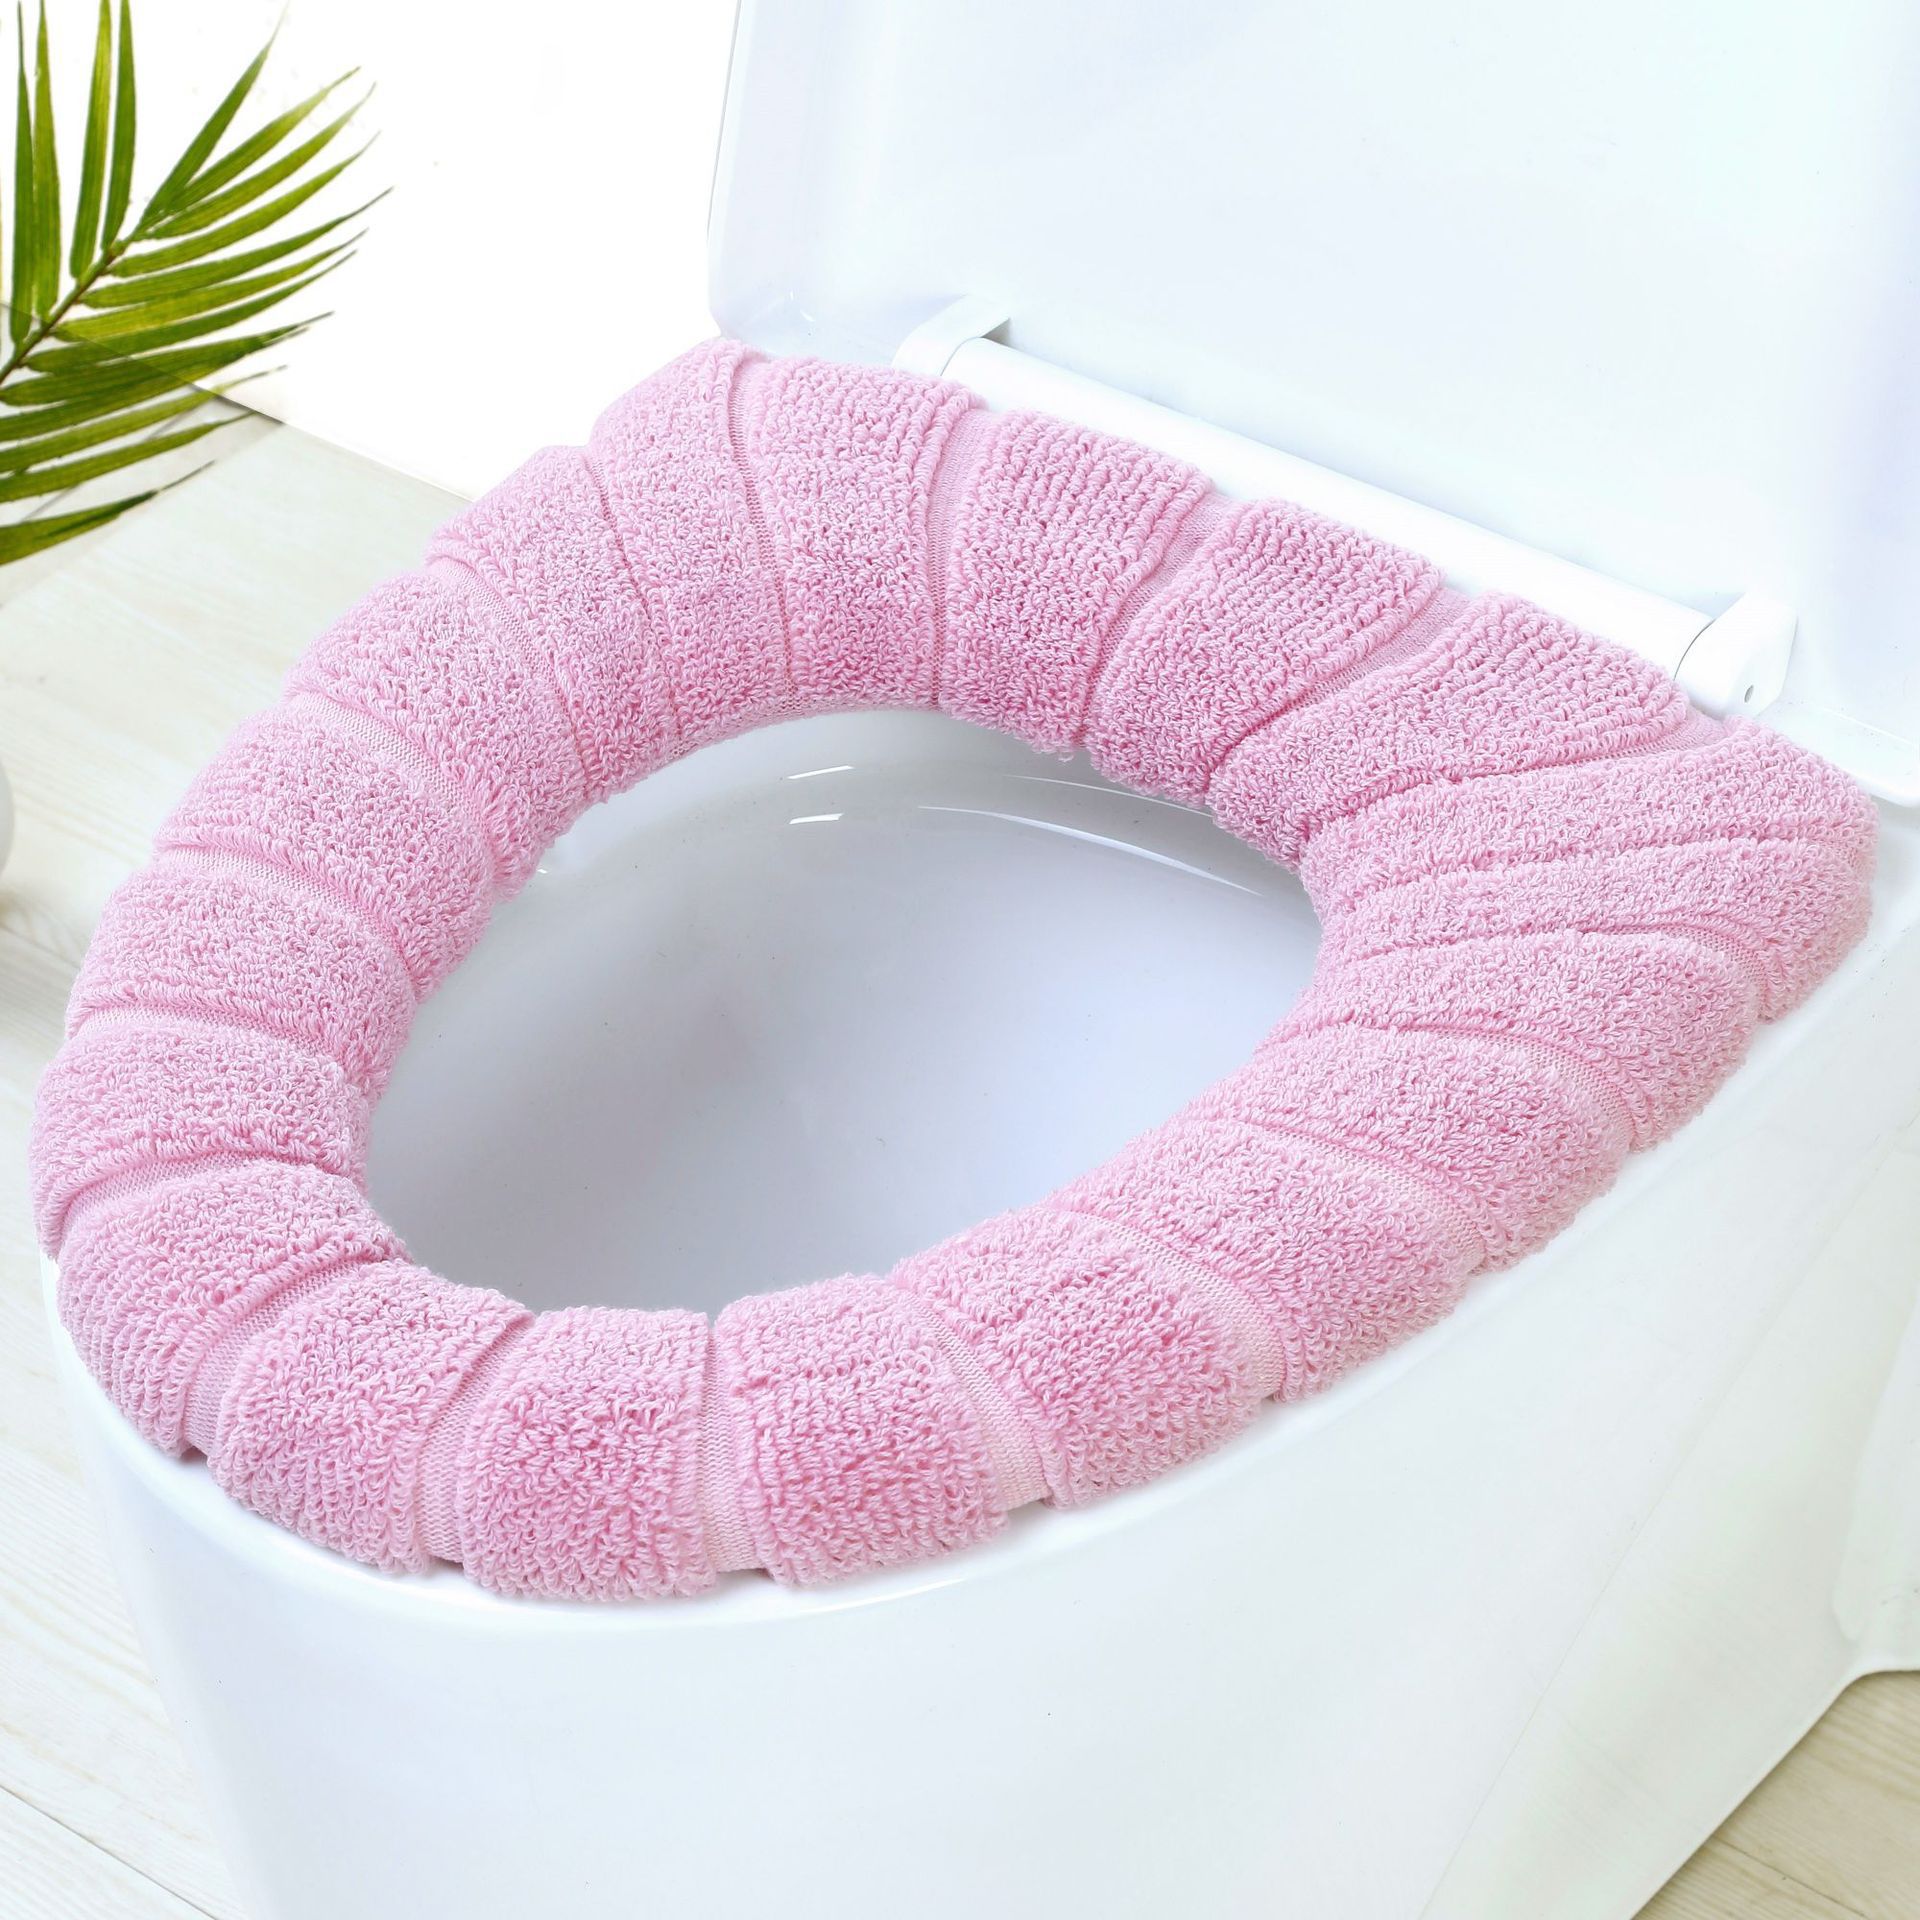 Toilet Mat Thickened Four Seasons Toilet Seat Cover Toilet Home Cover Universal Toilet Cover Disposable Washing and Velvet Pad